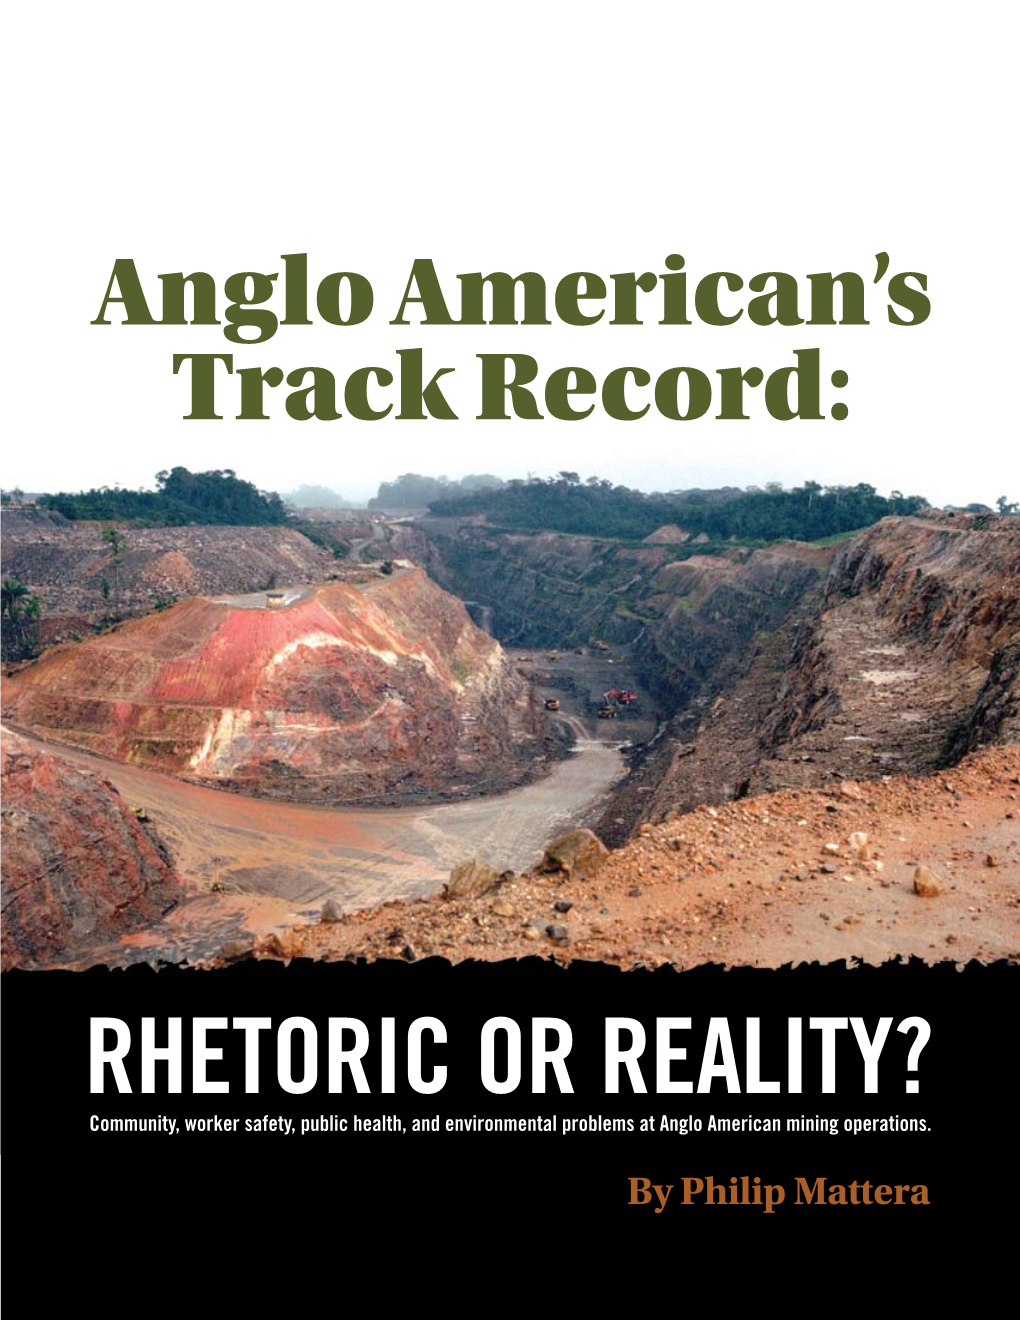 Report on Anglo American's Track Record